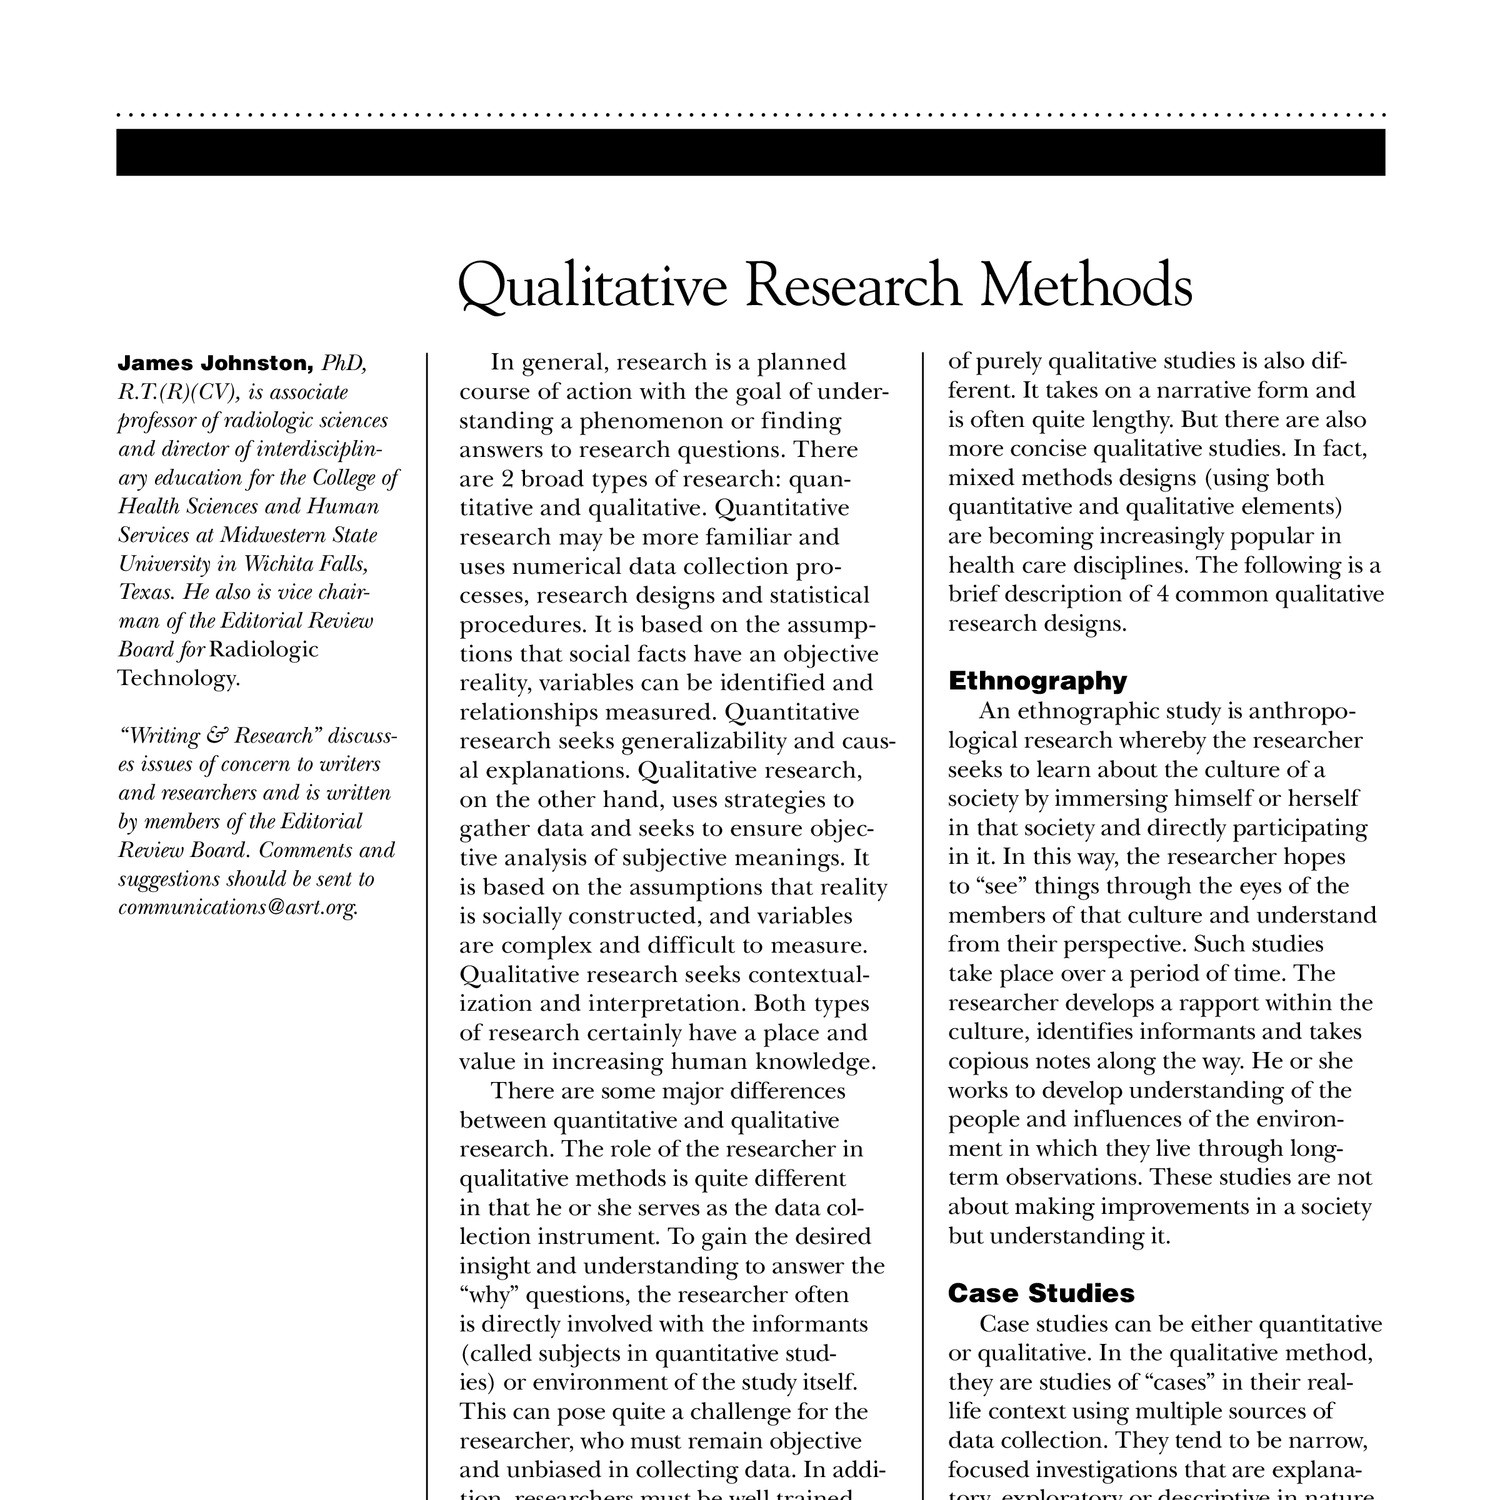 document study in qualitative research